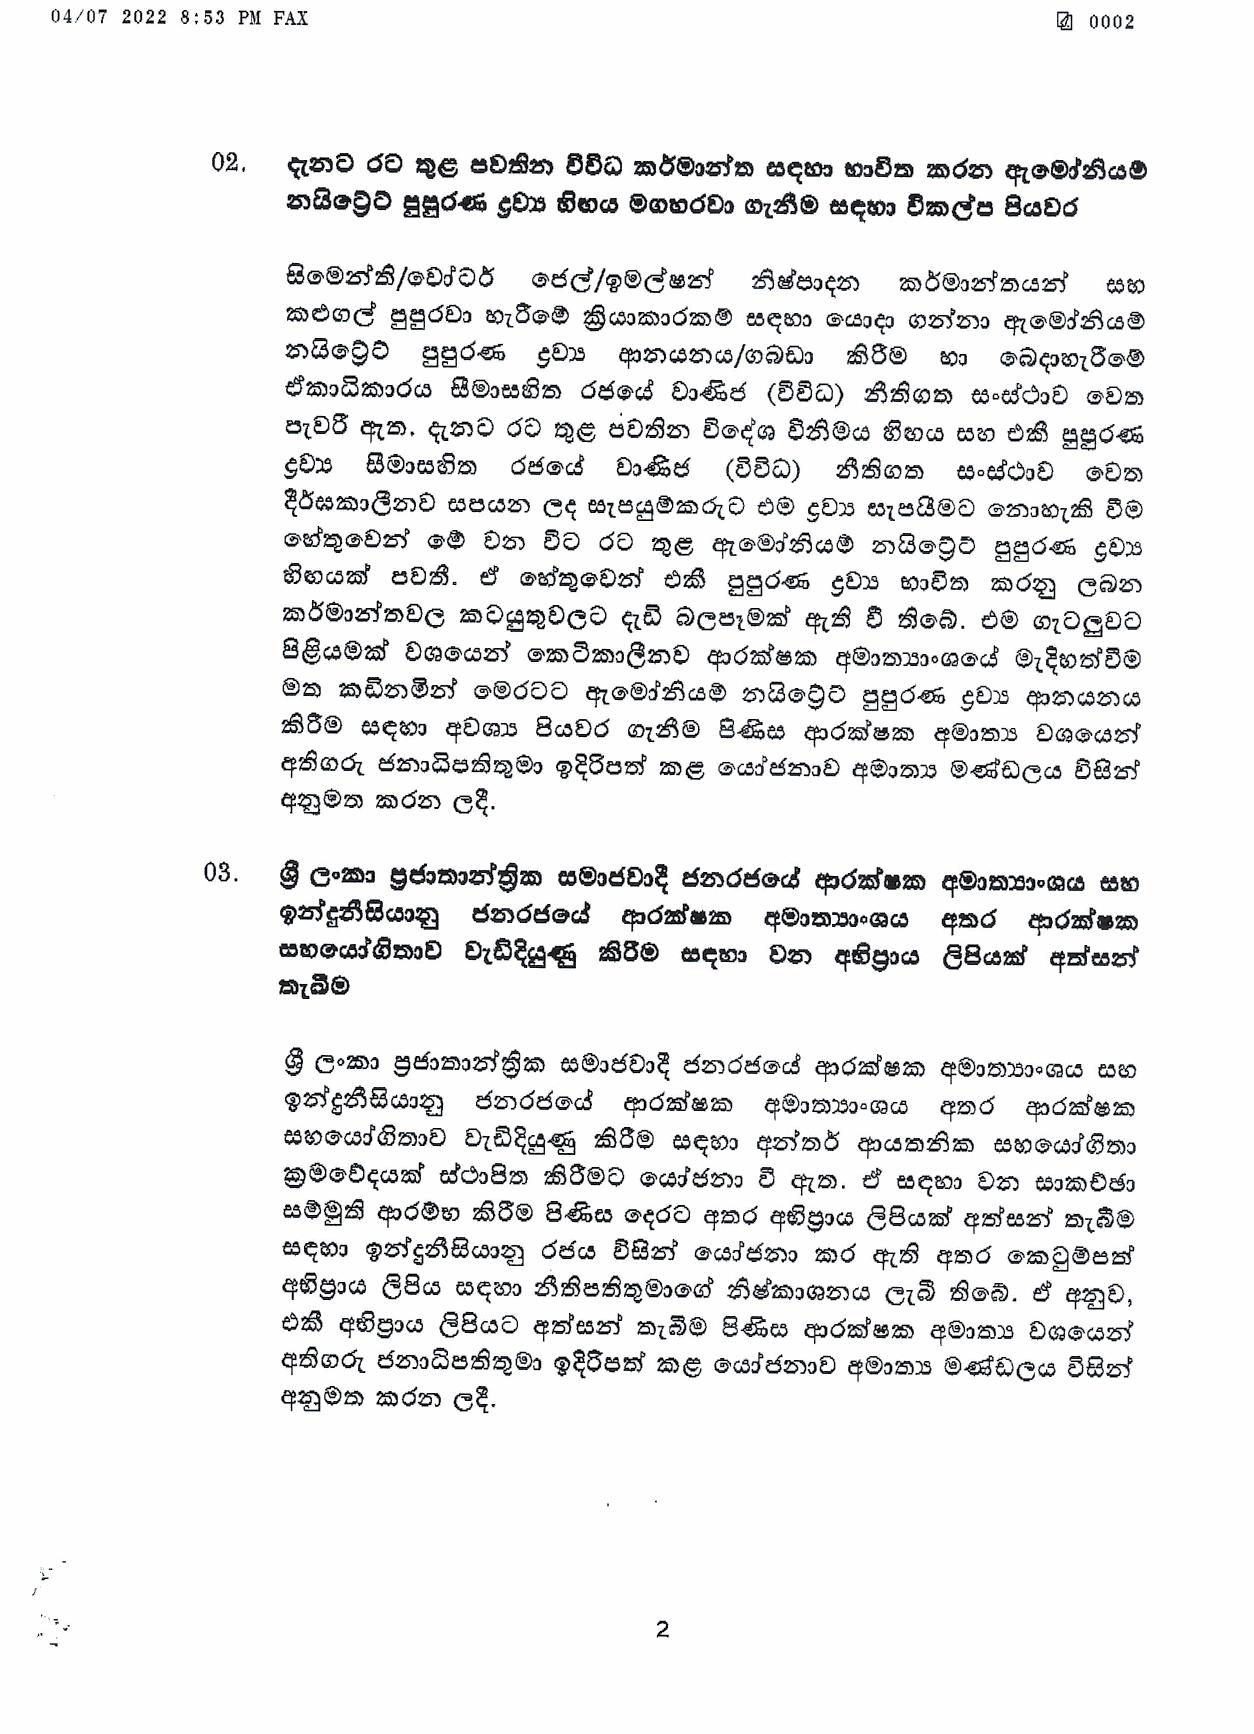 Cabinet Decision on 04.07.2022 page 002